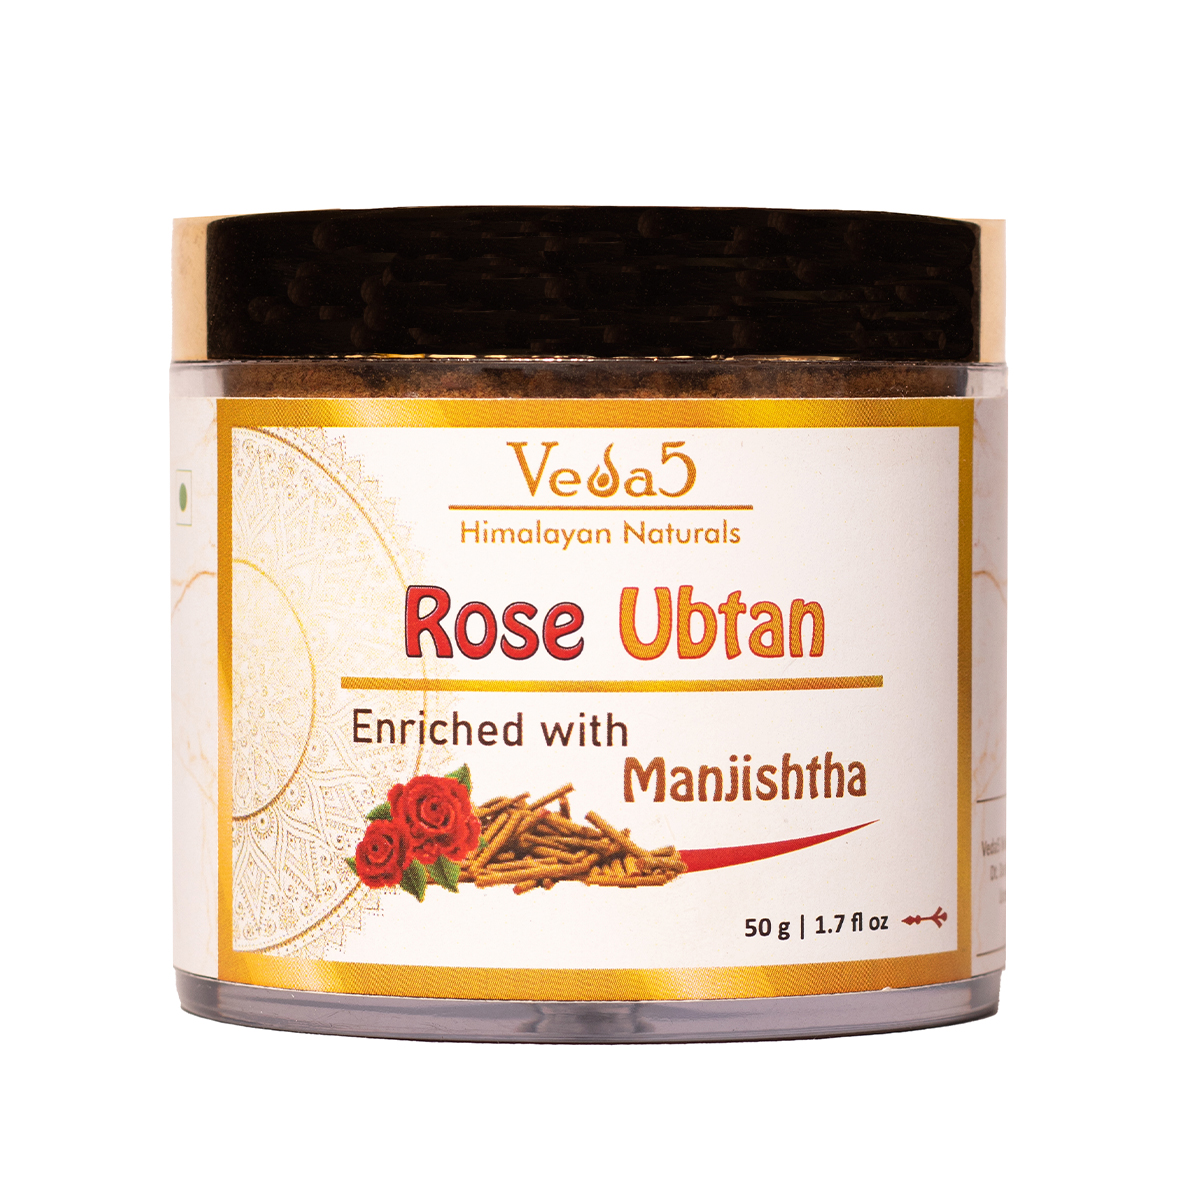 Rose Ubtan Enriched with Manjistha by Veda5 Himalayan Naturals 1